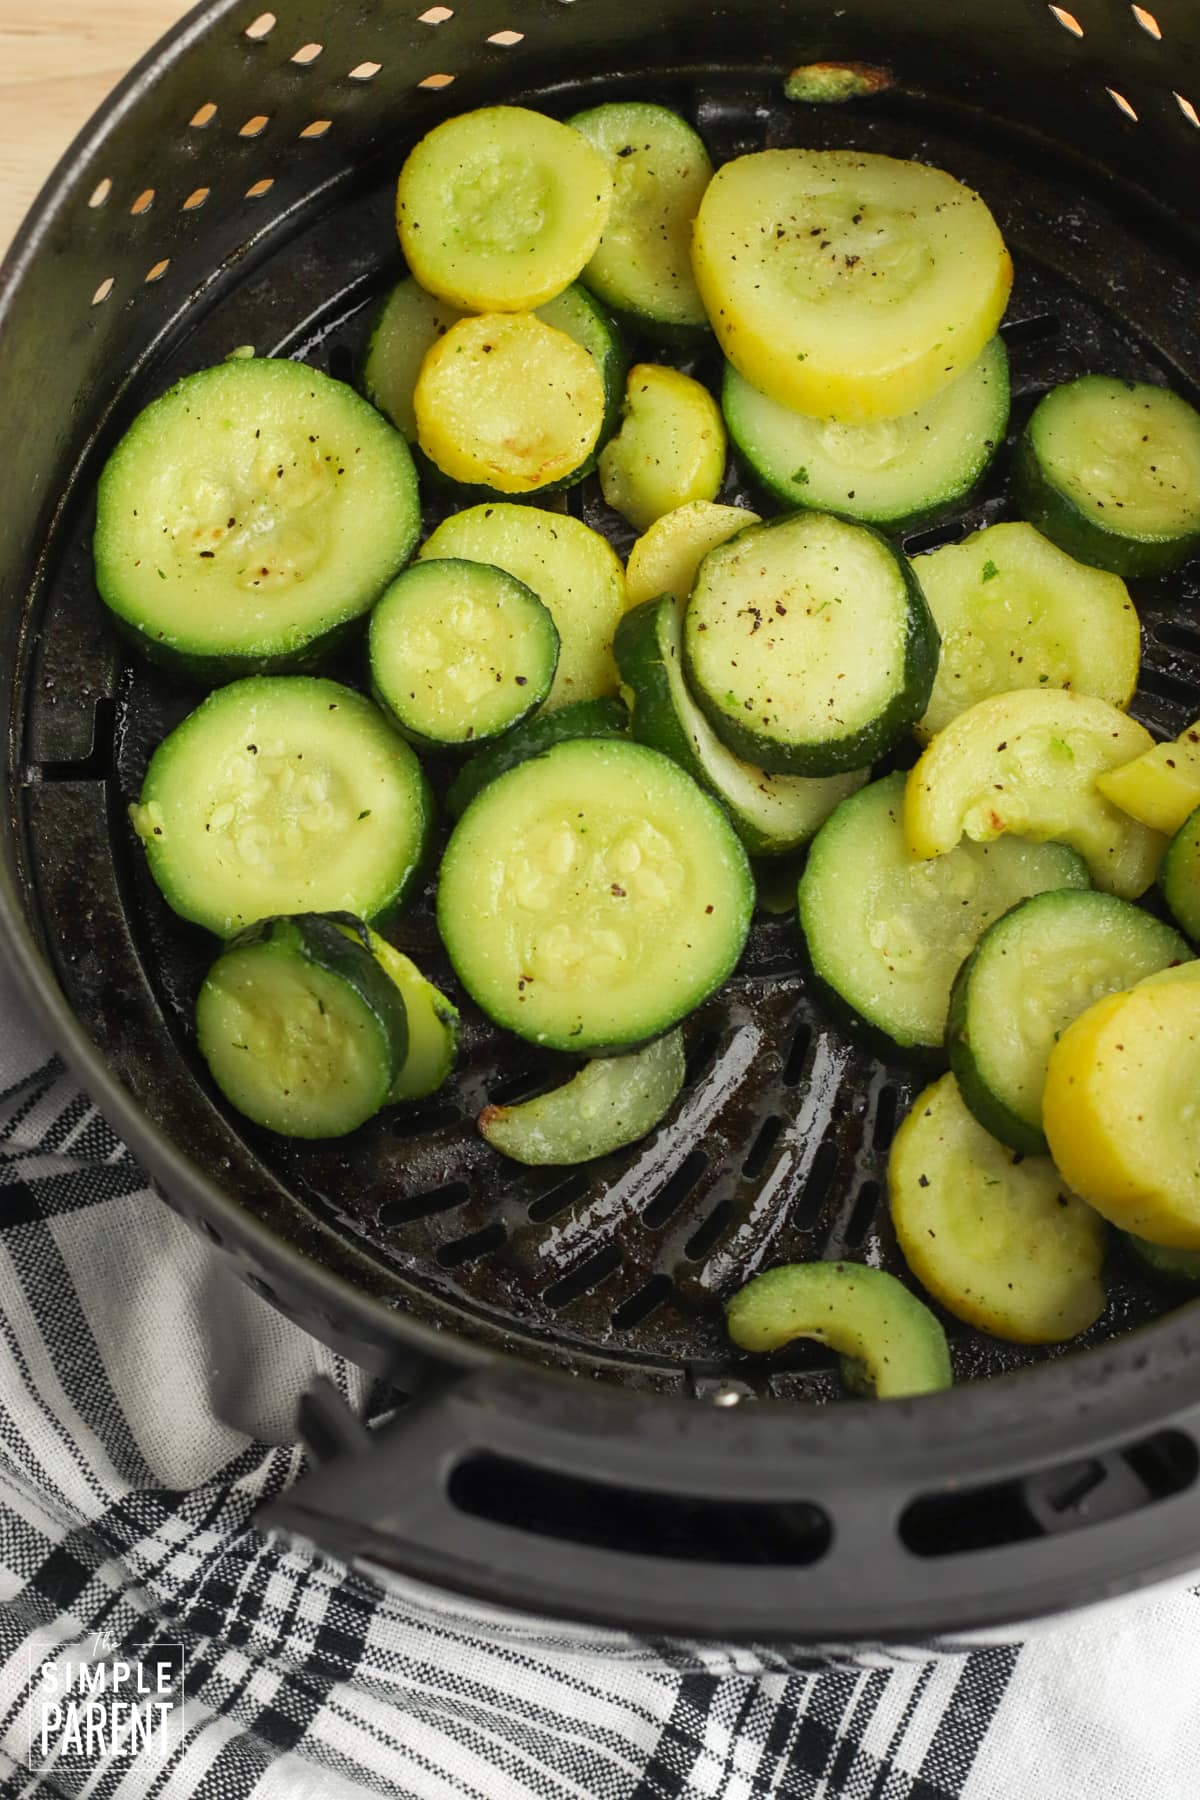 Squash and zucchini slices in air fryer basket